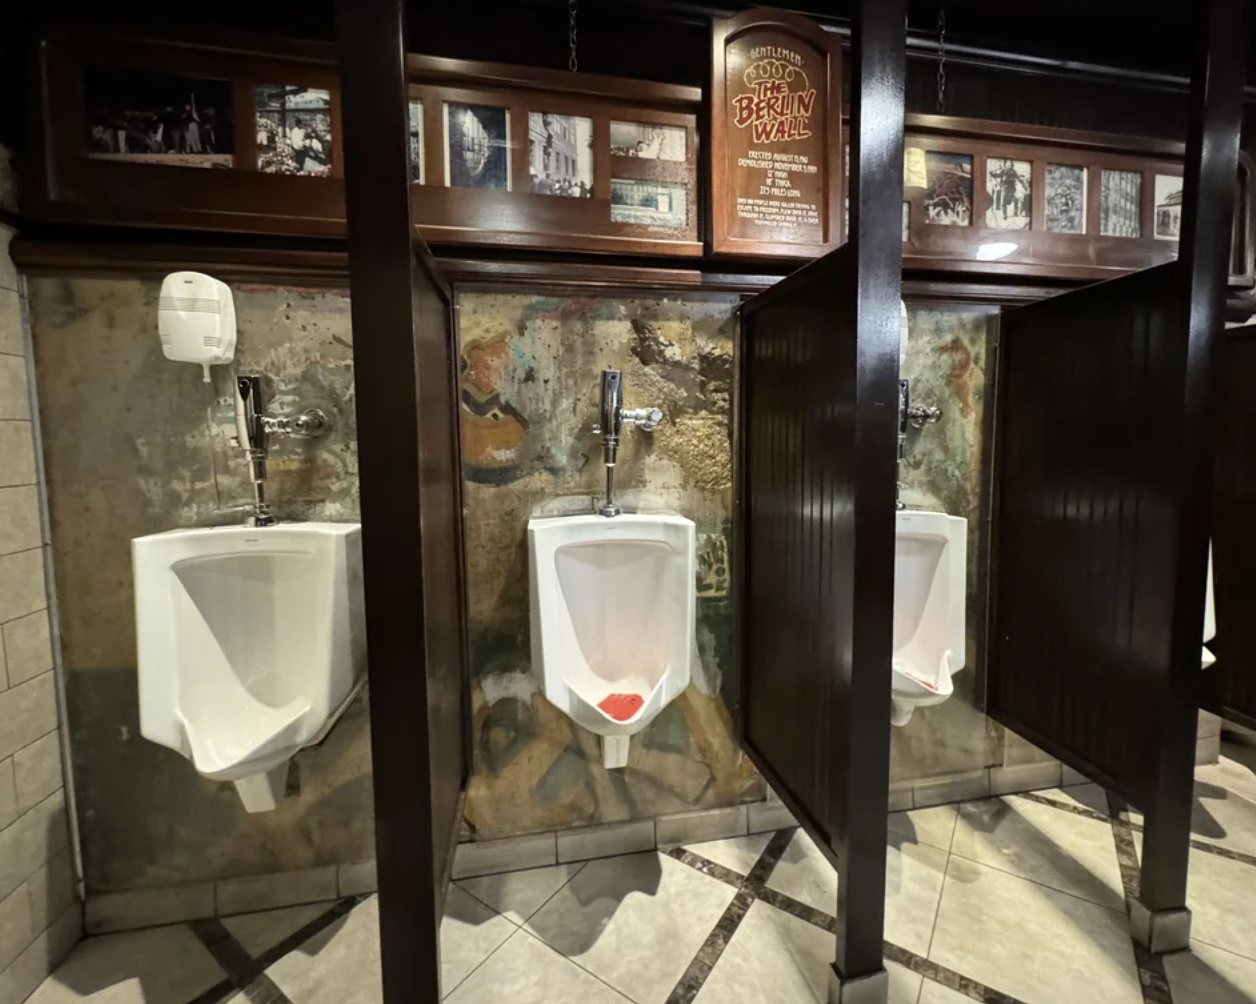 Public restroom with three urinals and hand sanitizer dispenser, featuring partitioned privacy